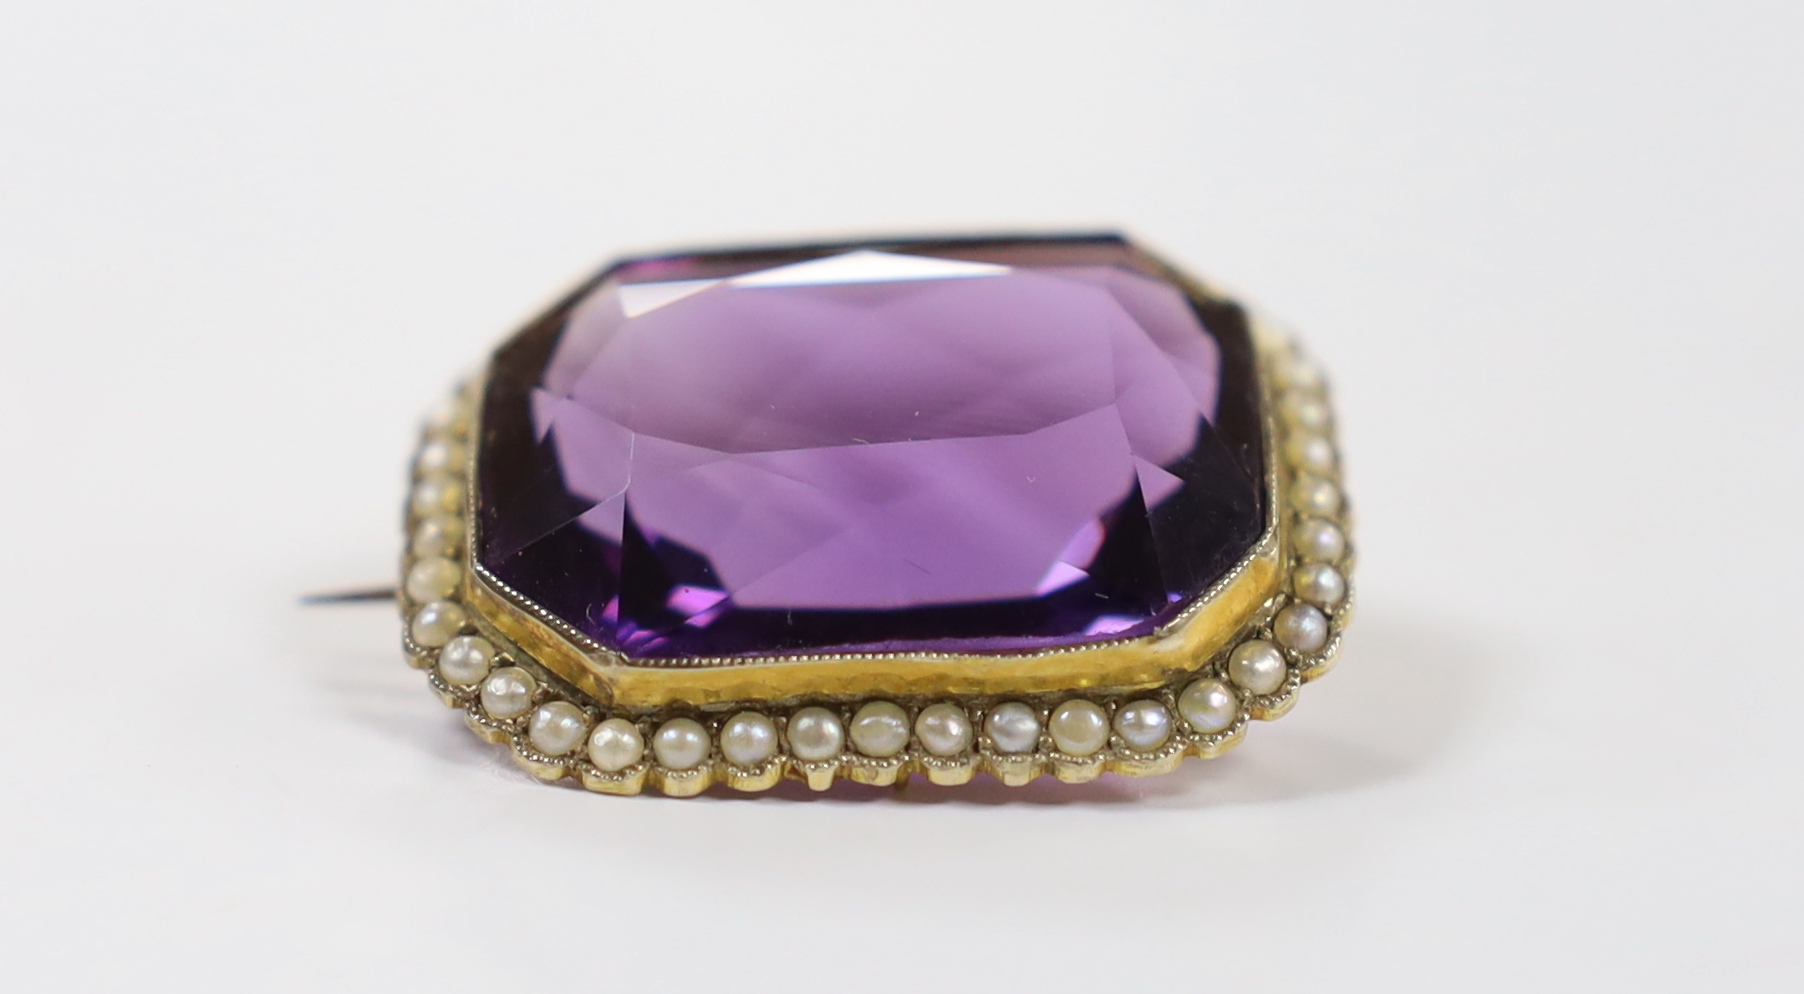 An Edwardian yellow metal mounted emerald cut amethyst and seed pearl cluster set brooch, 31mm, gross weight 11.9 grams.